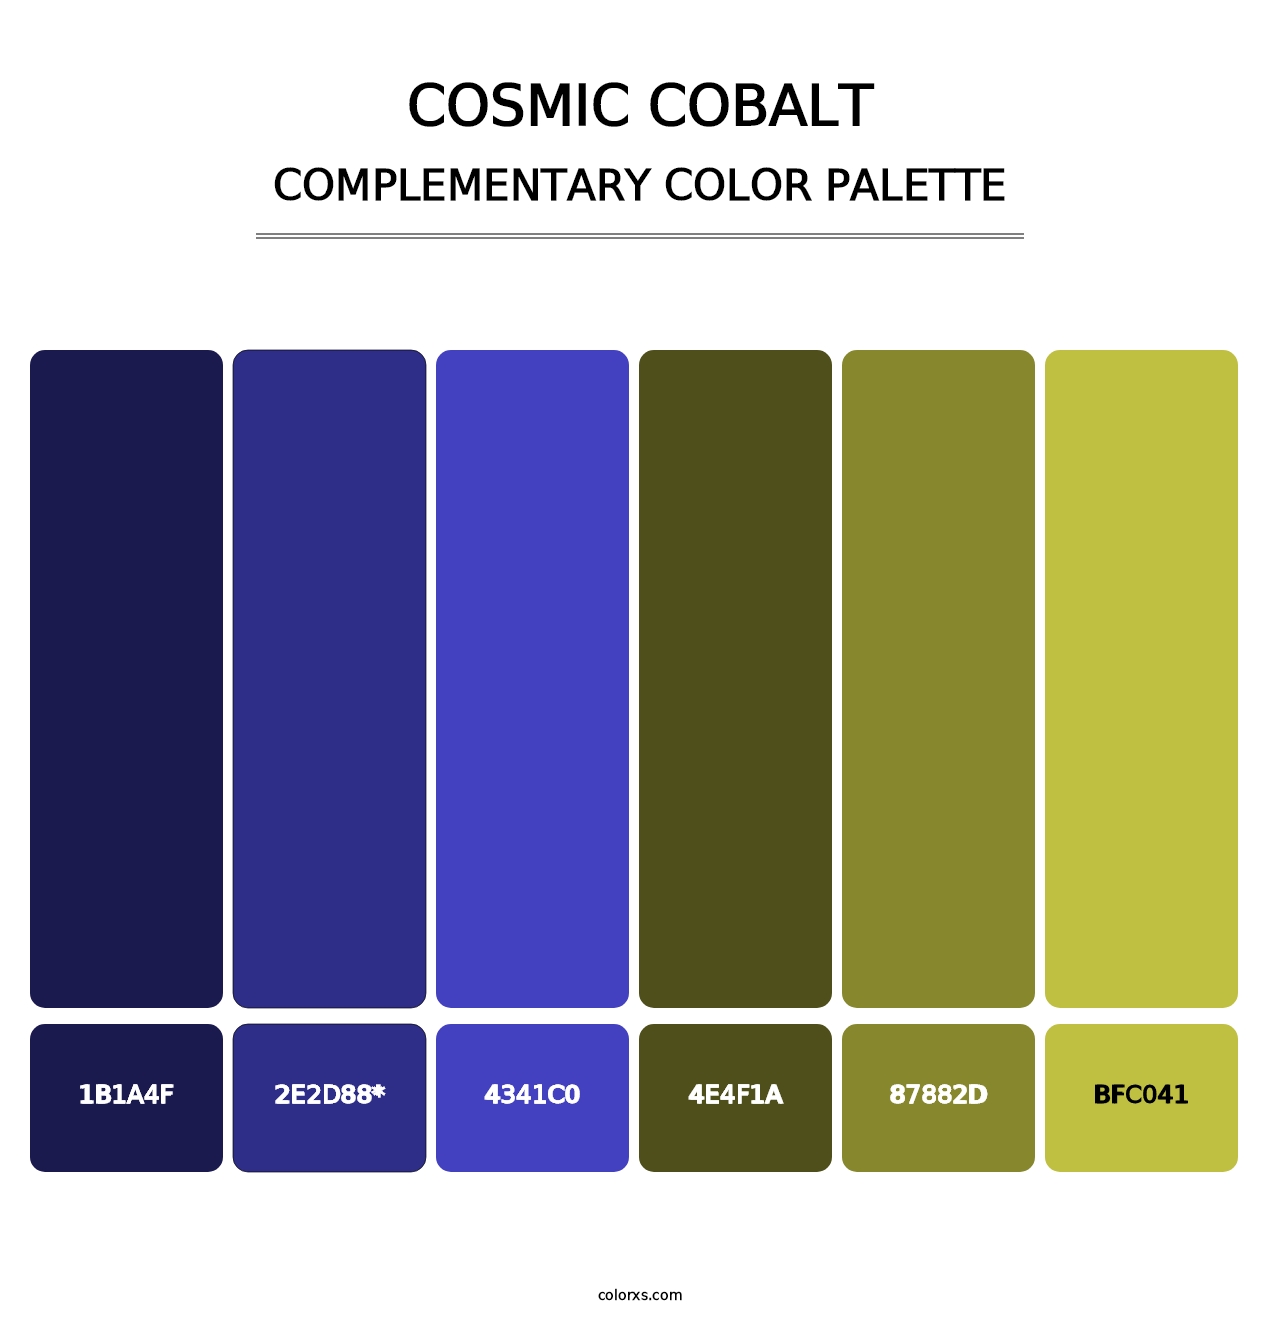 Cosmic Cobalt - Complementary Color Palette